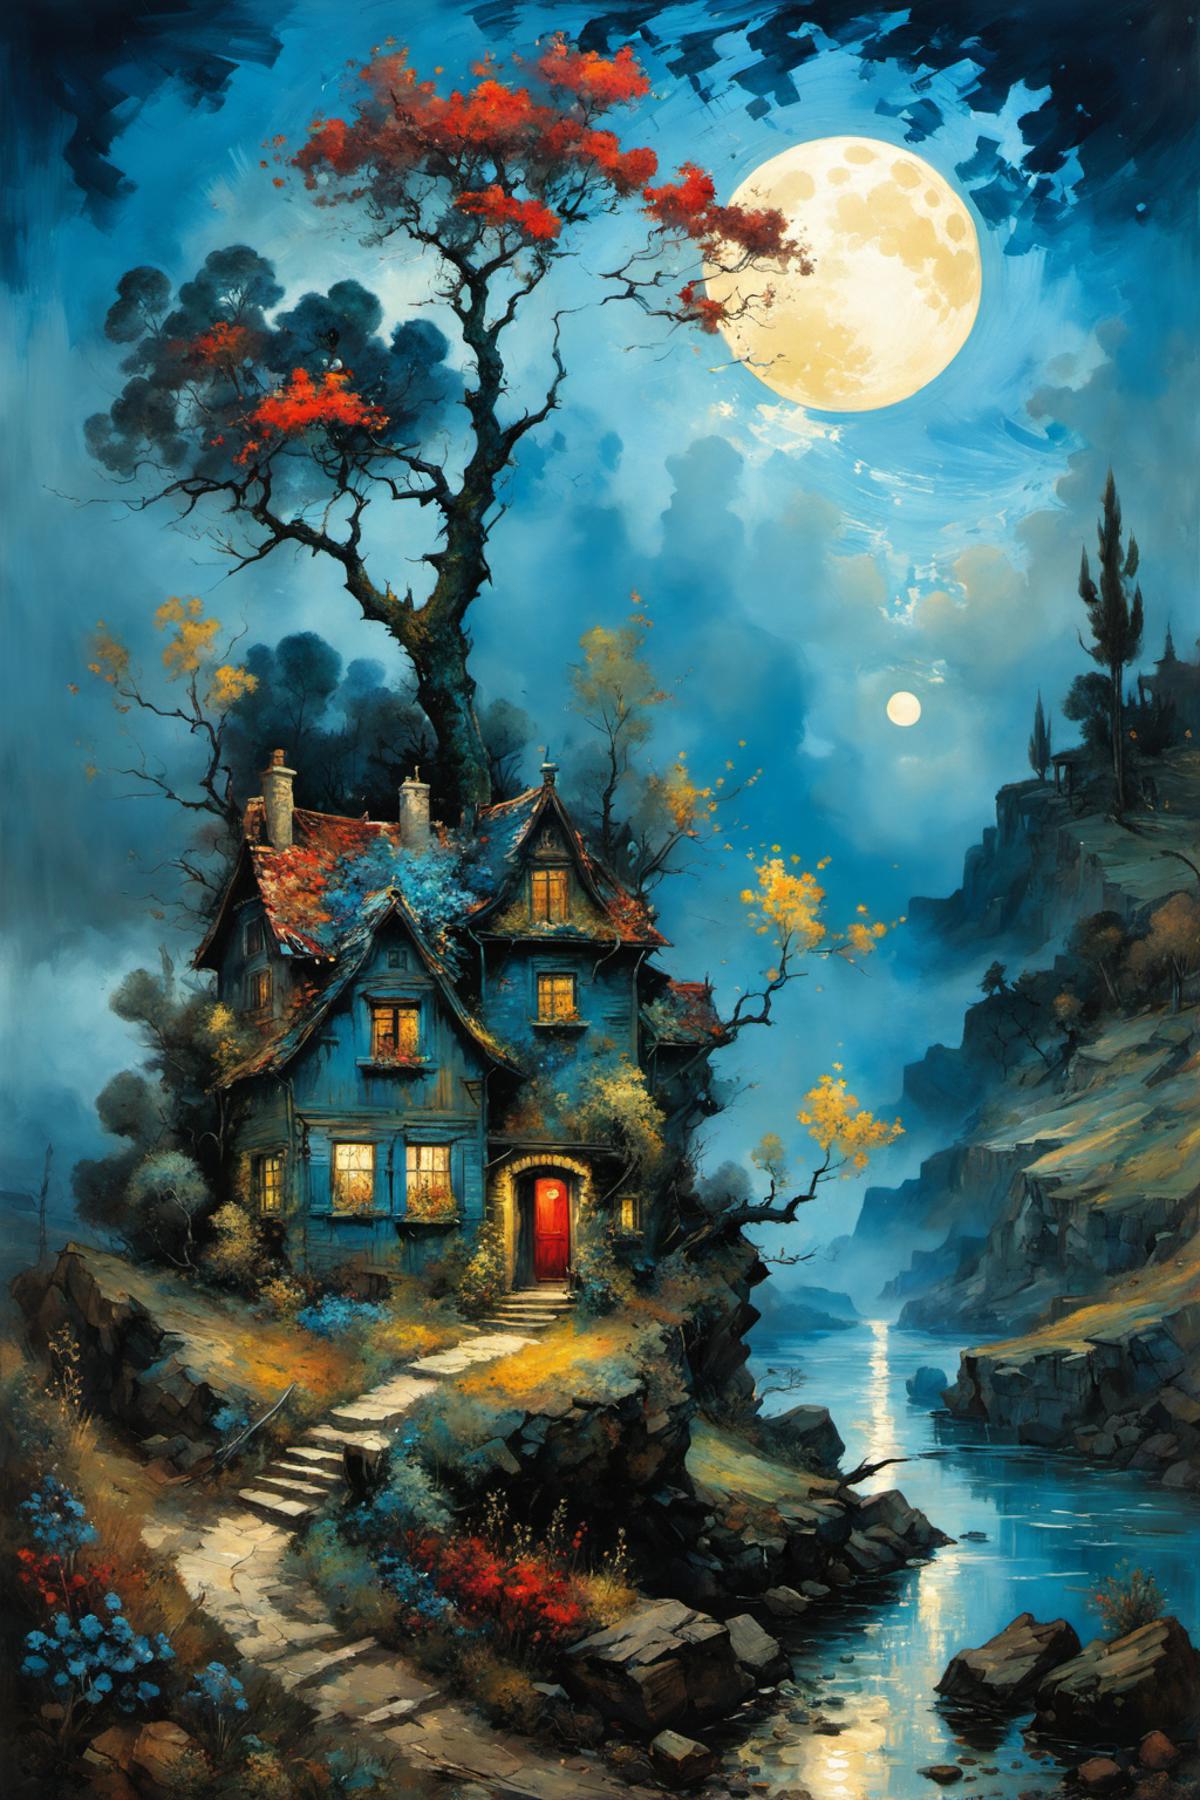 A magical, fantasy painting of a blue house with a red door, set in a forest, with the moon in the background.